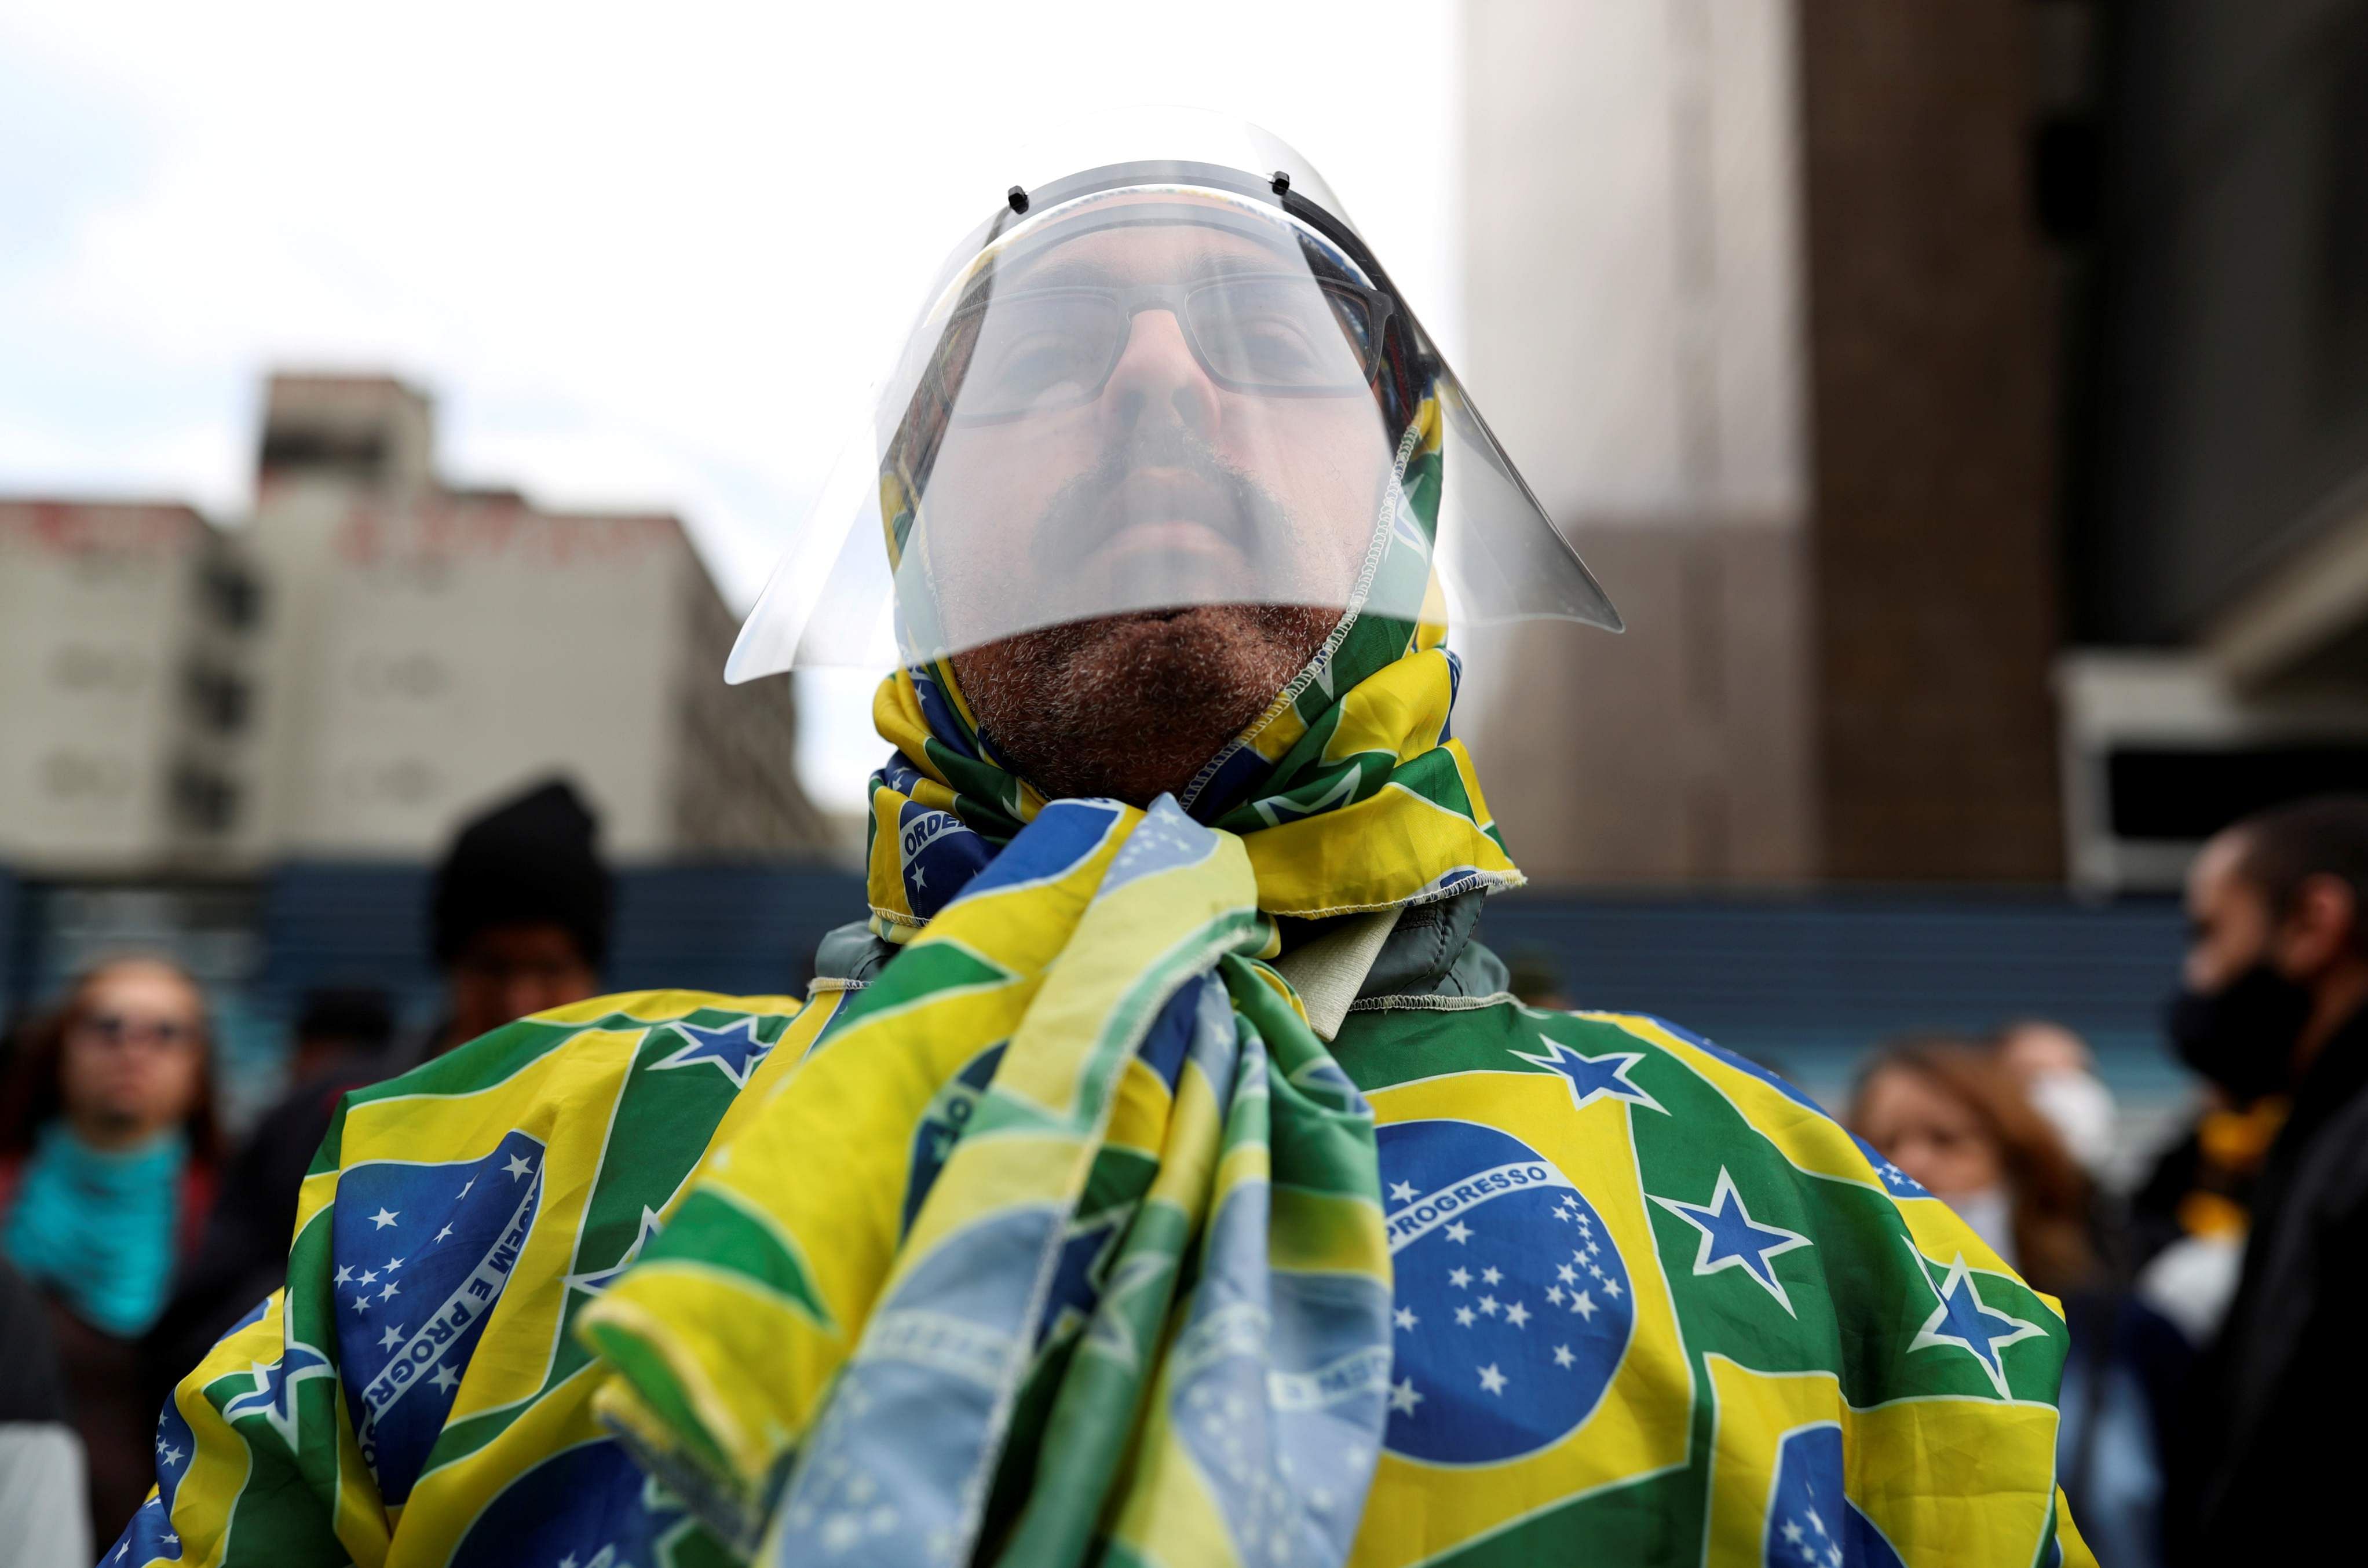 Brazil's far-right president has famously compared the new coronavirus to a "little flu" and railed against stay-at-home measures to contain it, citing their economic toll. Credit: Reuters